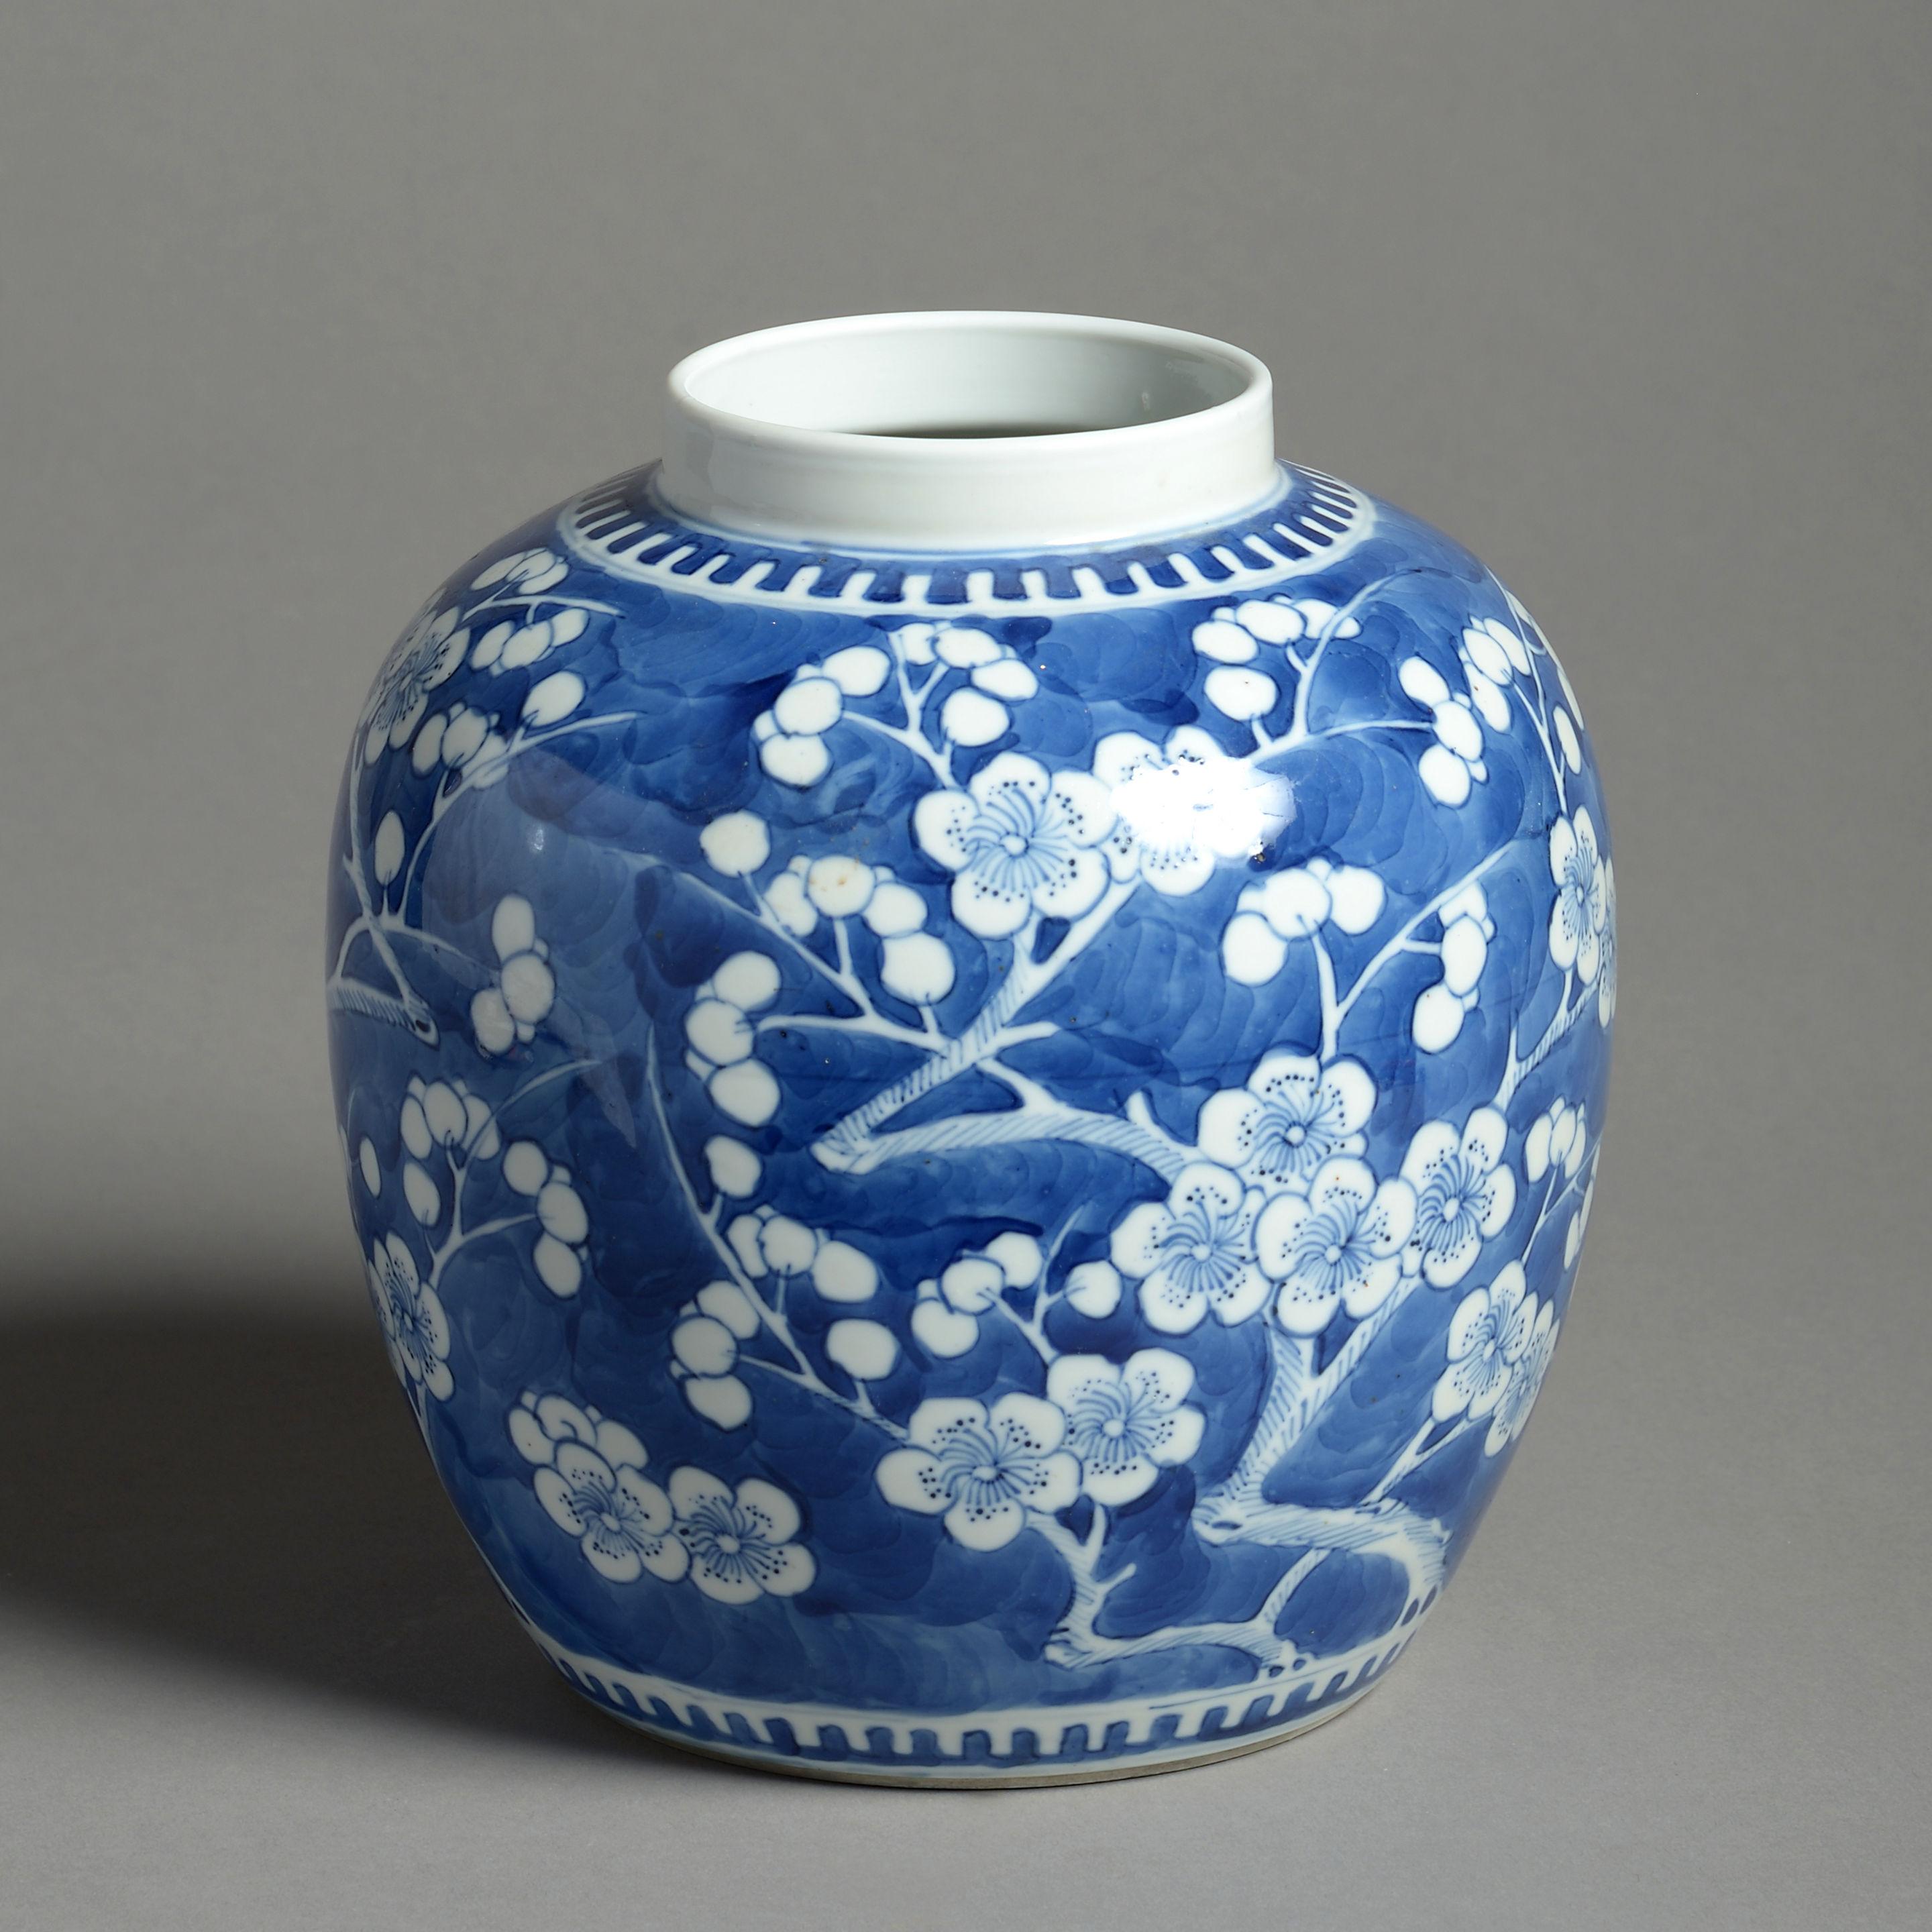 A 19th century porcelain jar of bulbous form, decorated throughout with white prunus blossoms upon a blue ground. 

Having character marks to the underside.